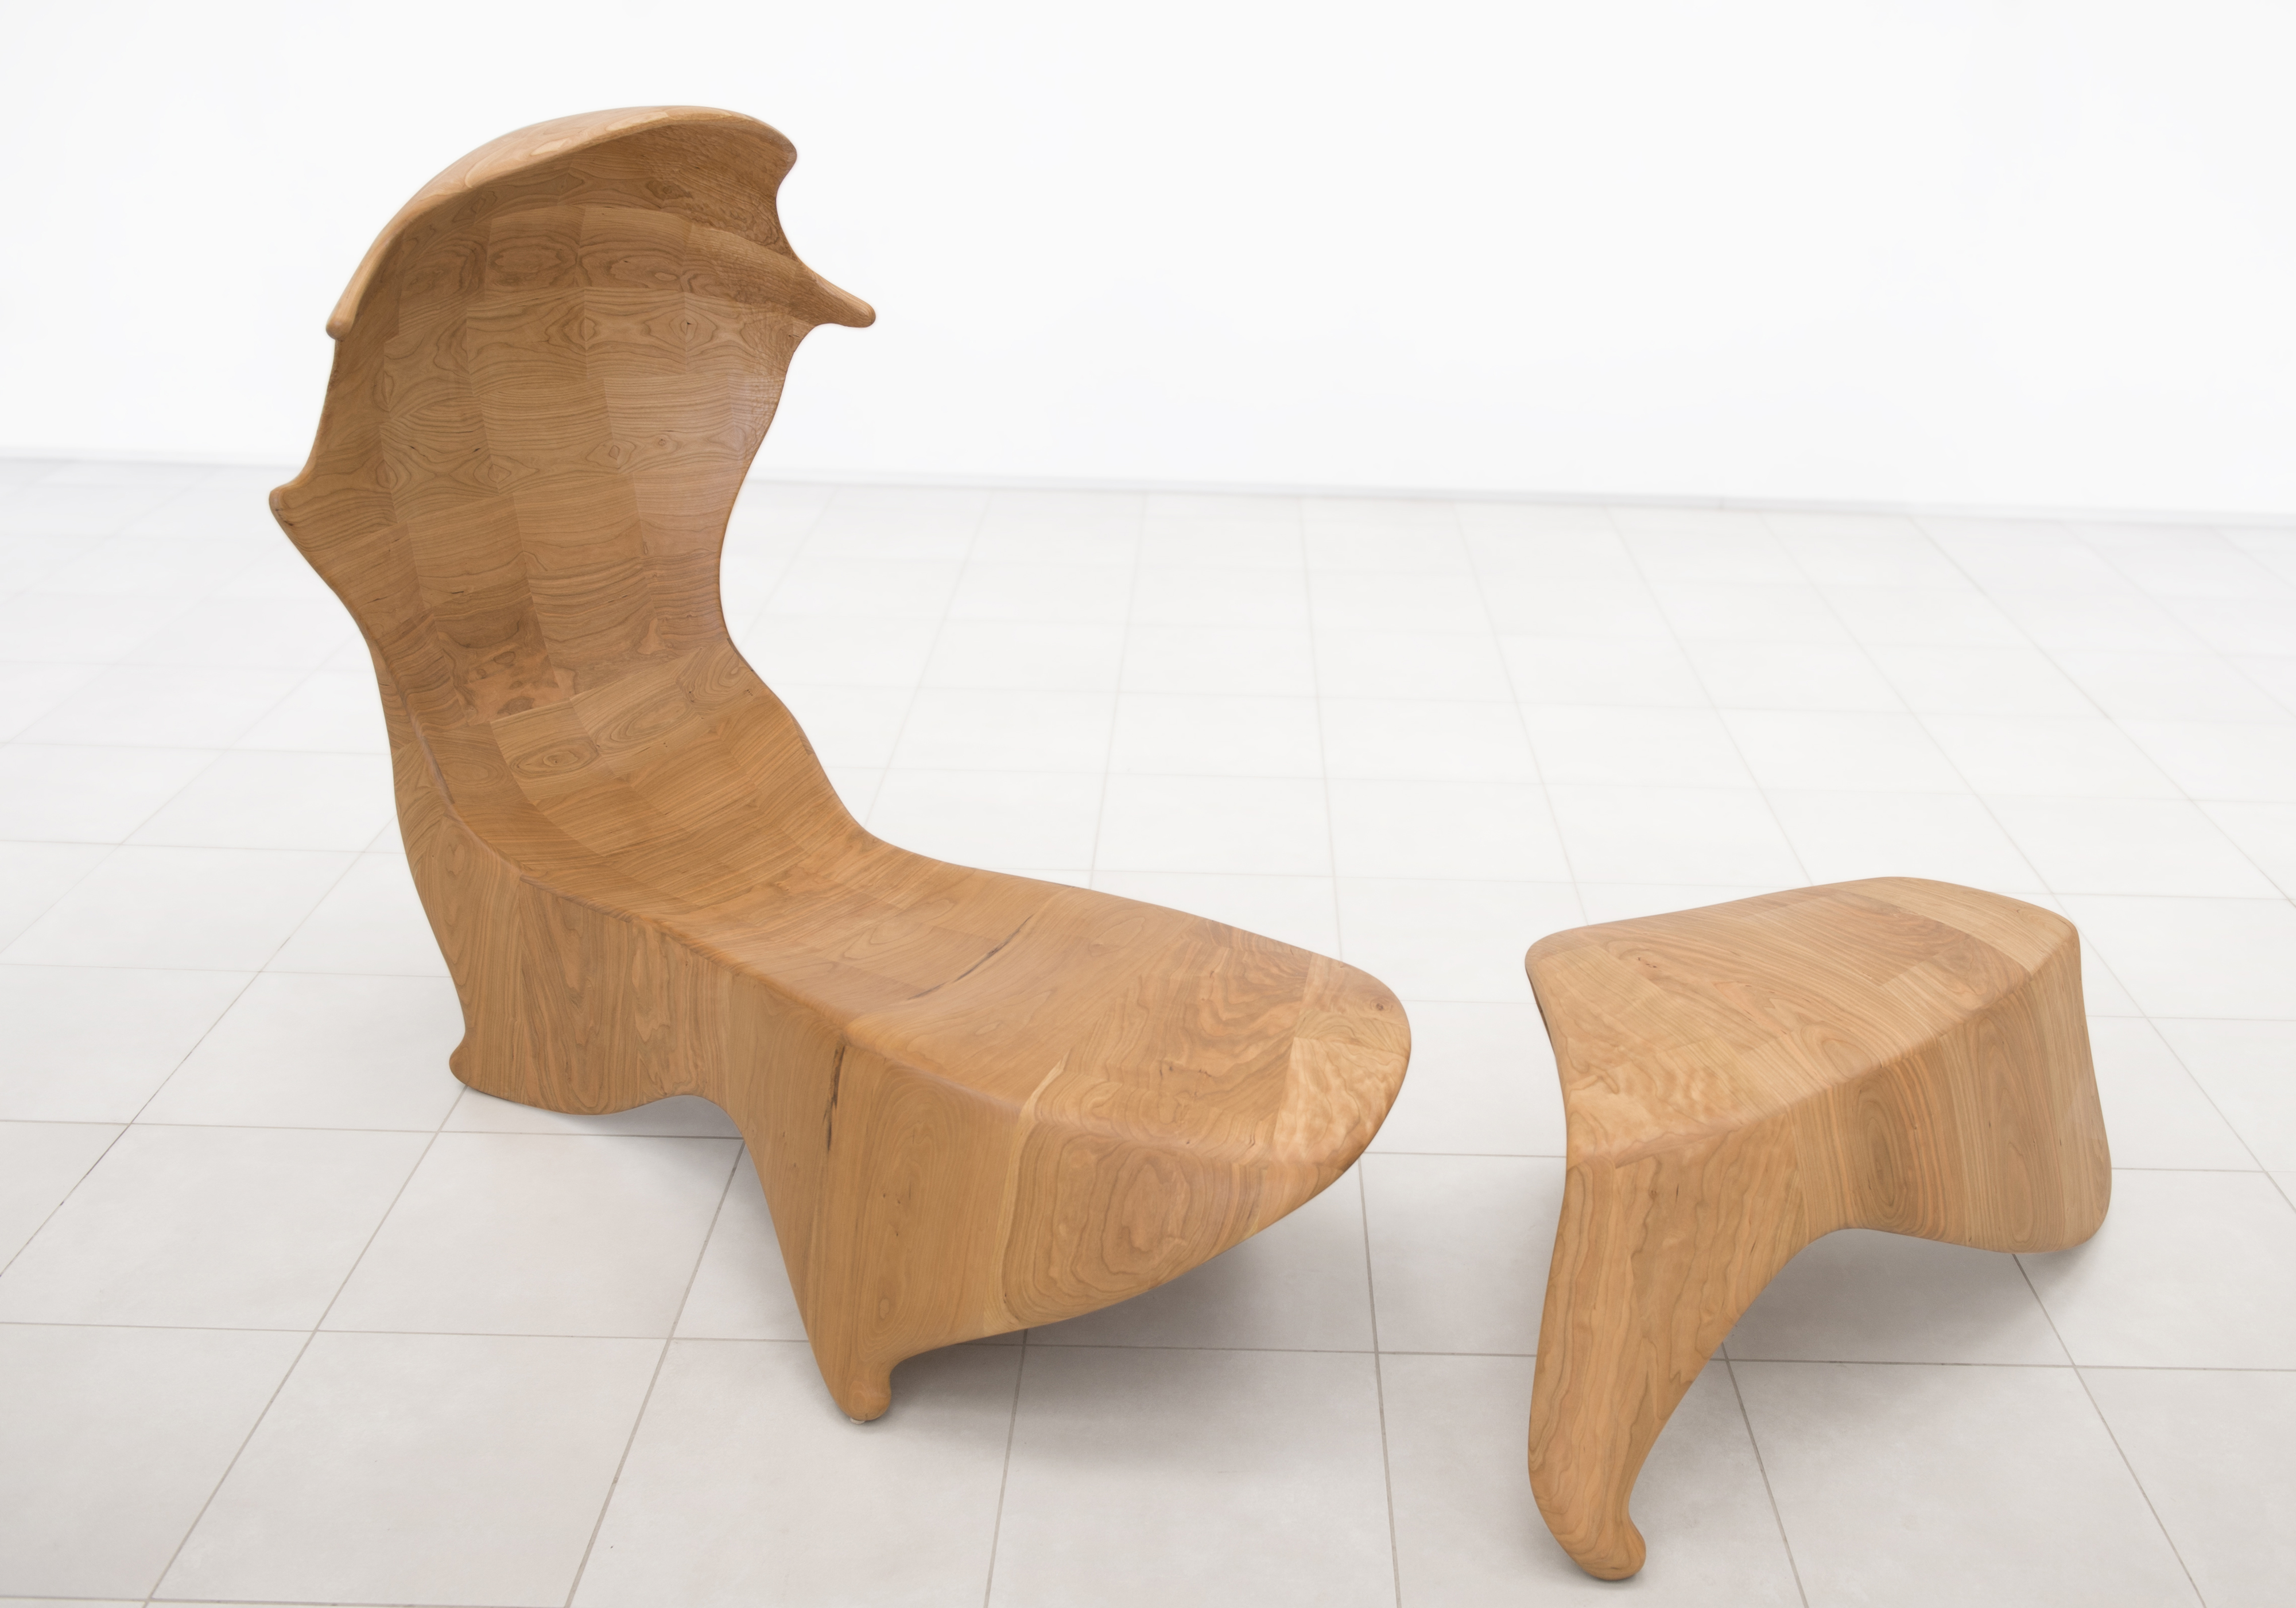 An abstract recliner and ottoman in light wood by Keunho Peter Park